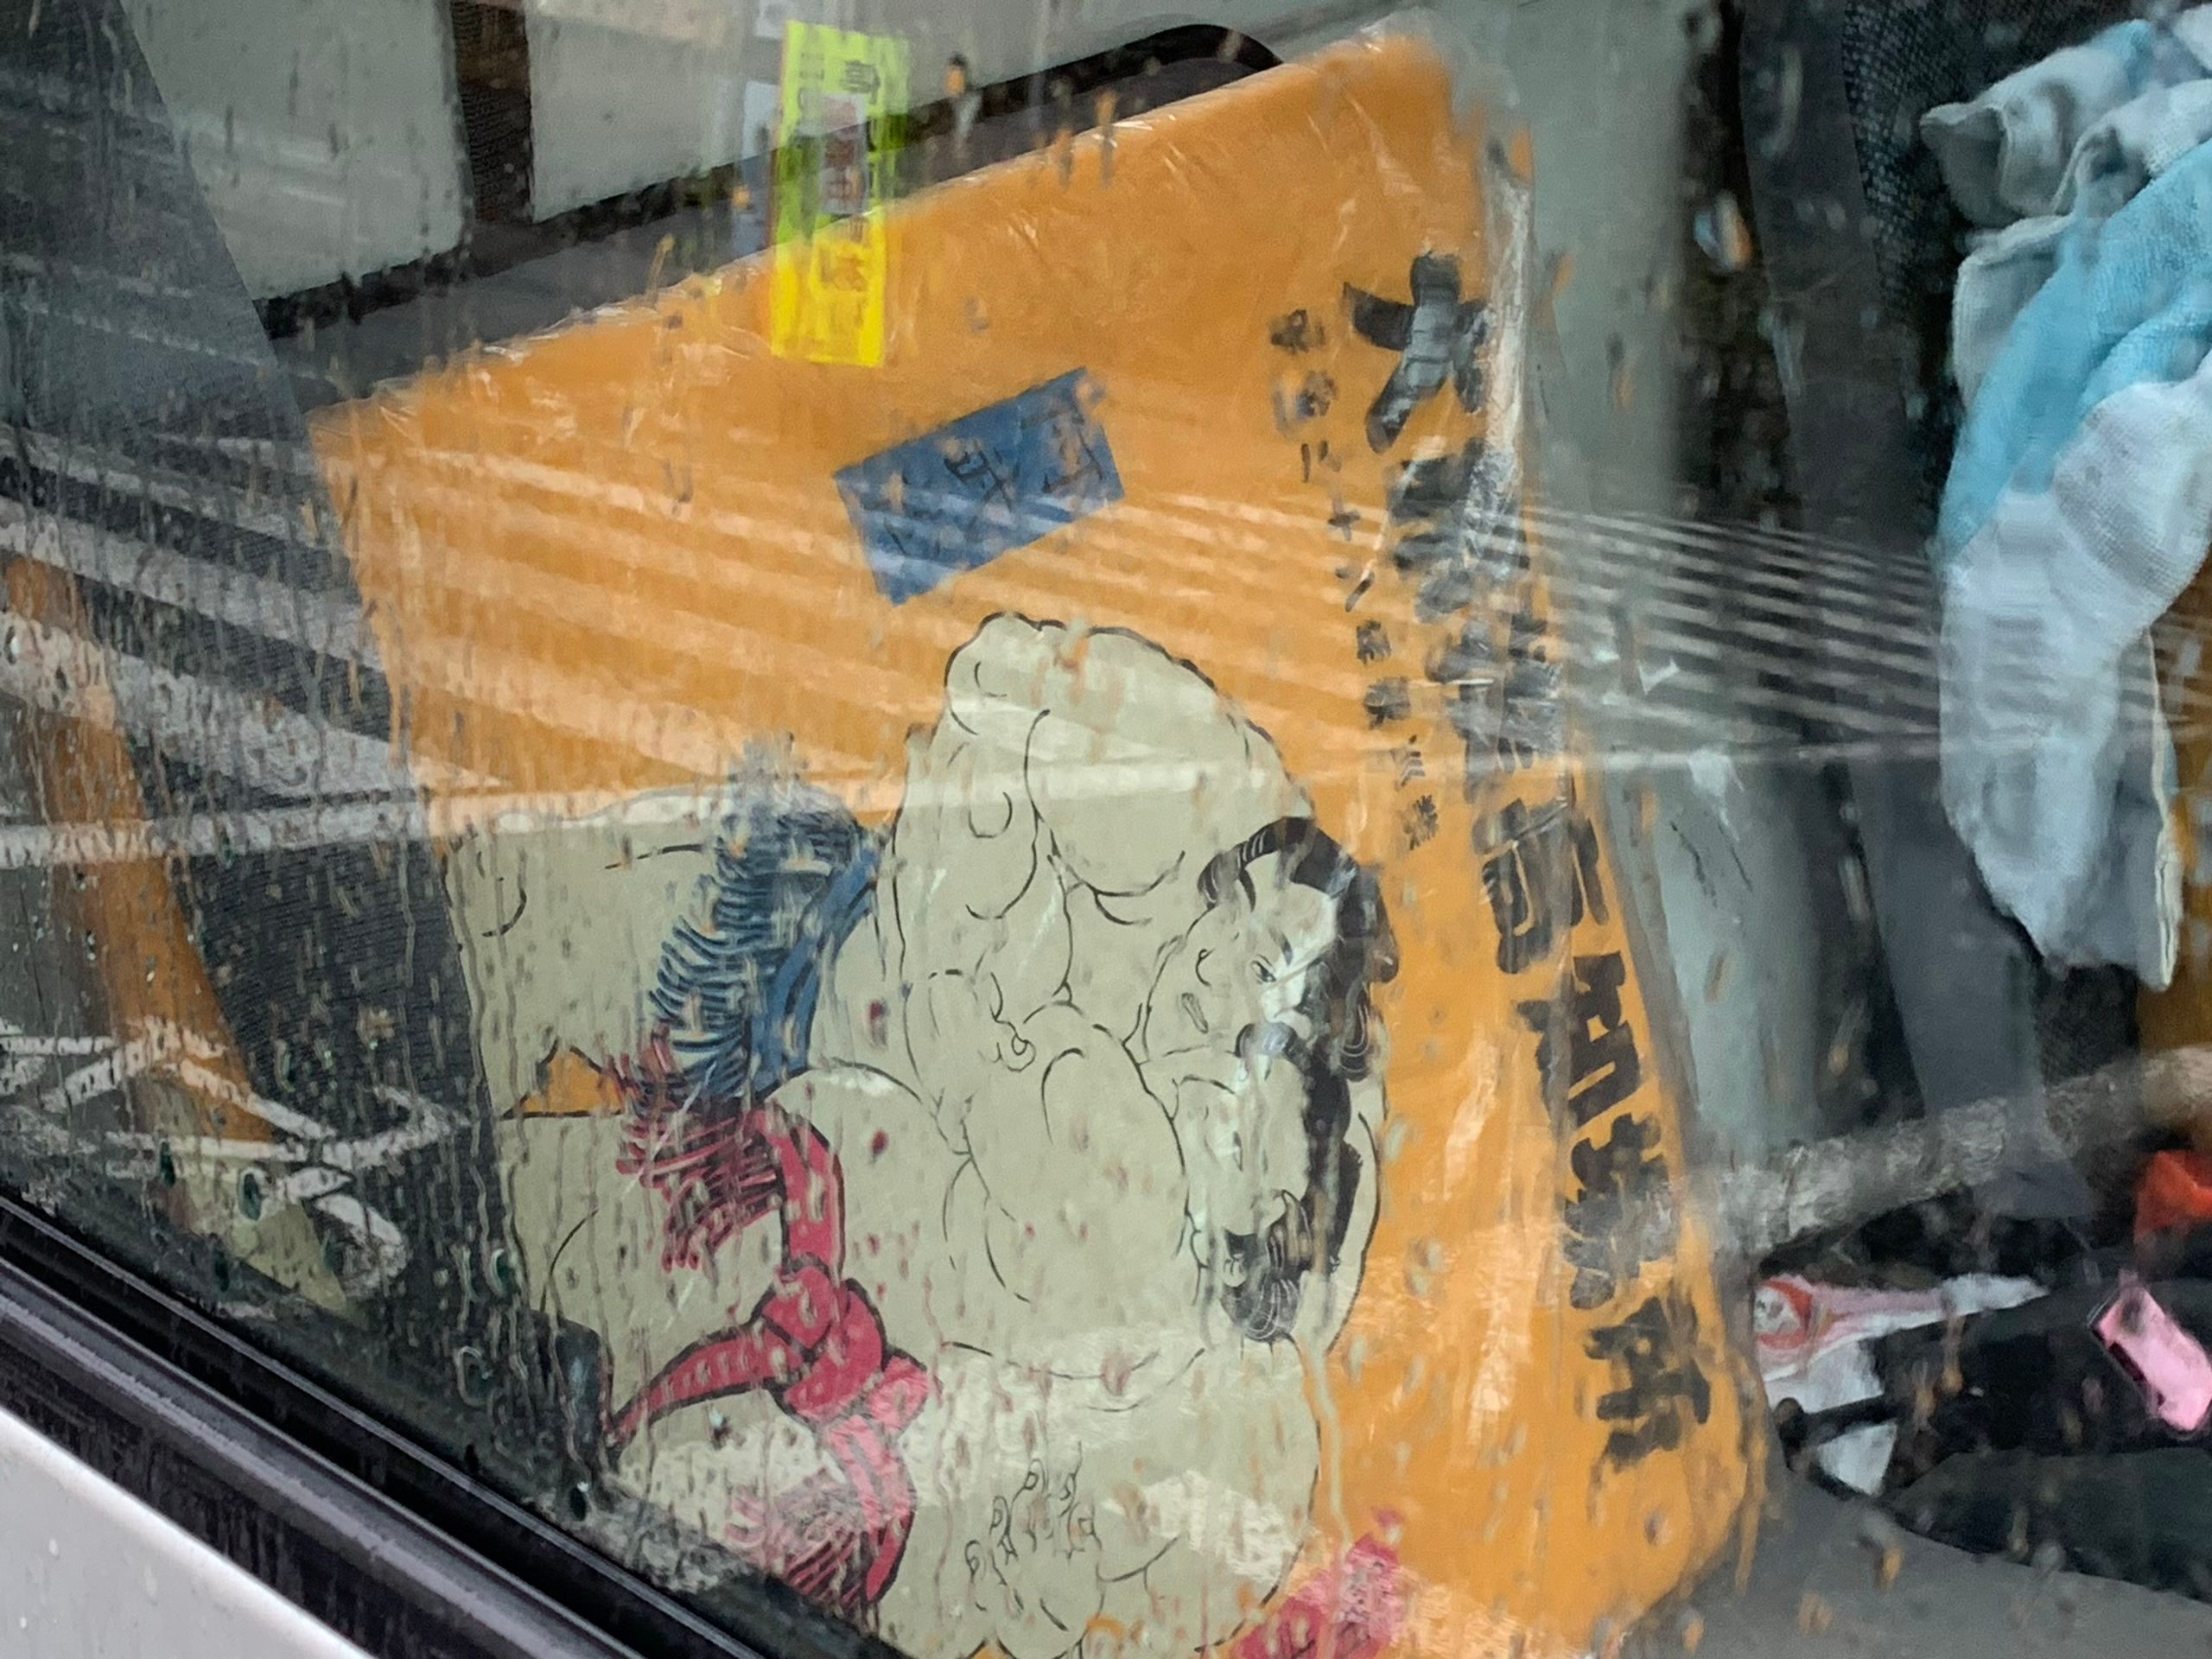 Looking through the wet window of another car, a picture of two medieval sumo wrestlers in the driver’s seat.